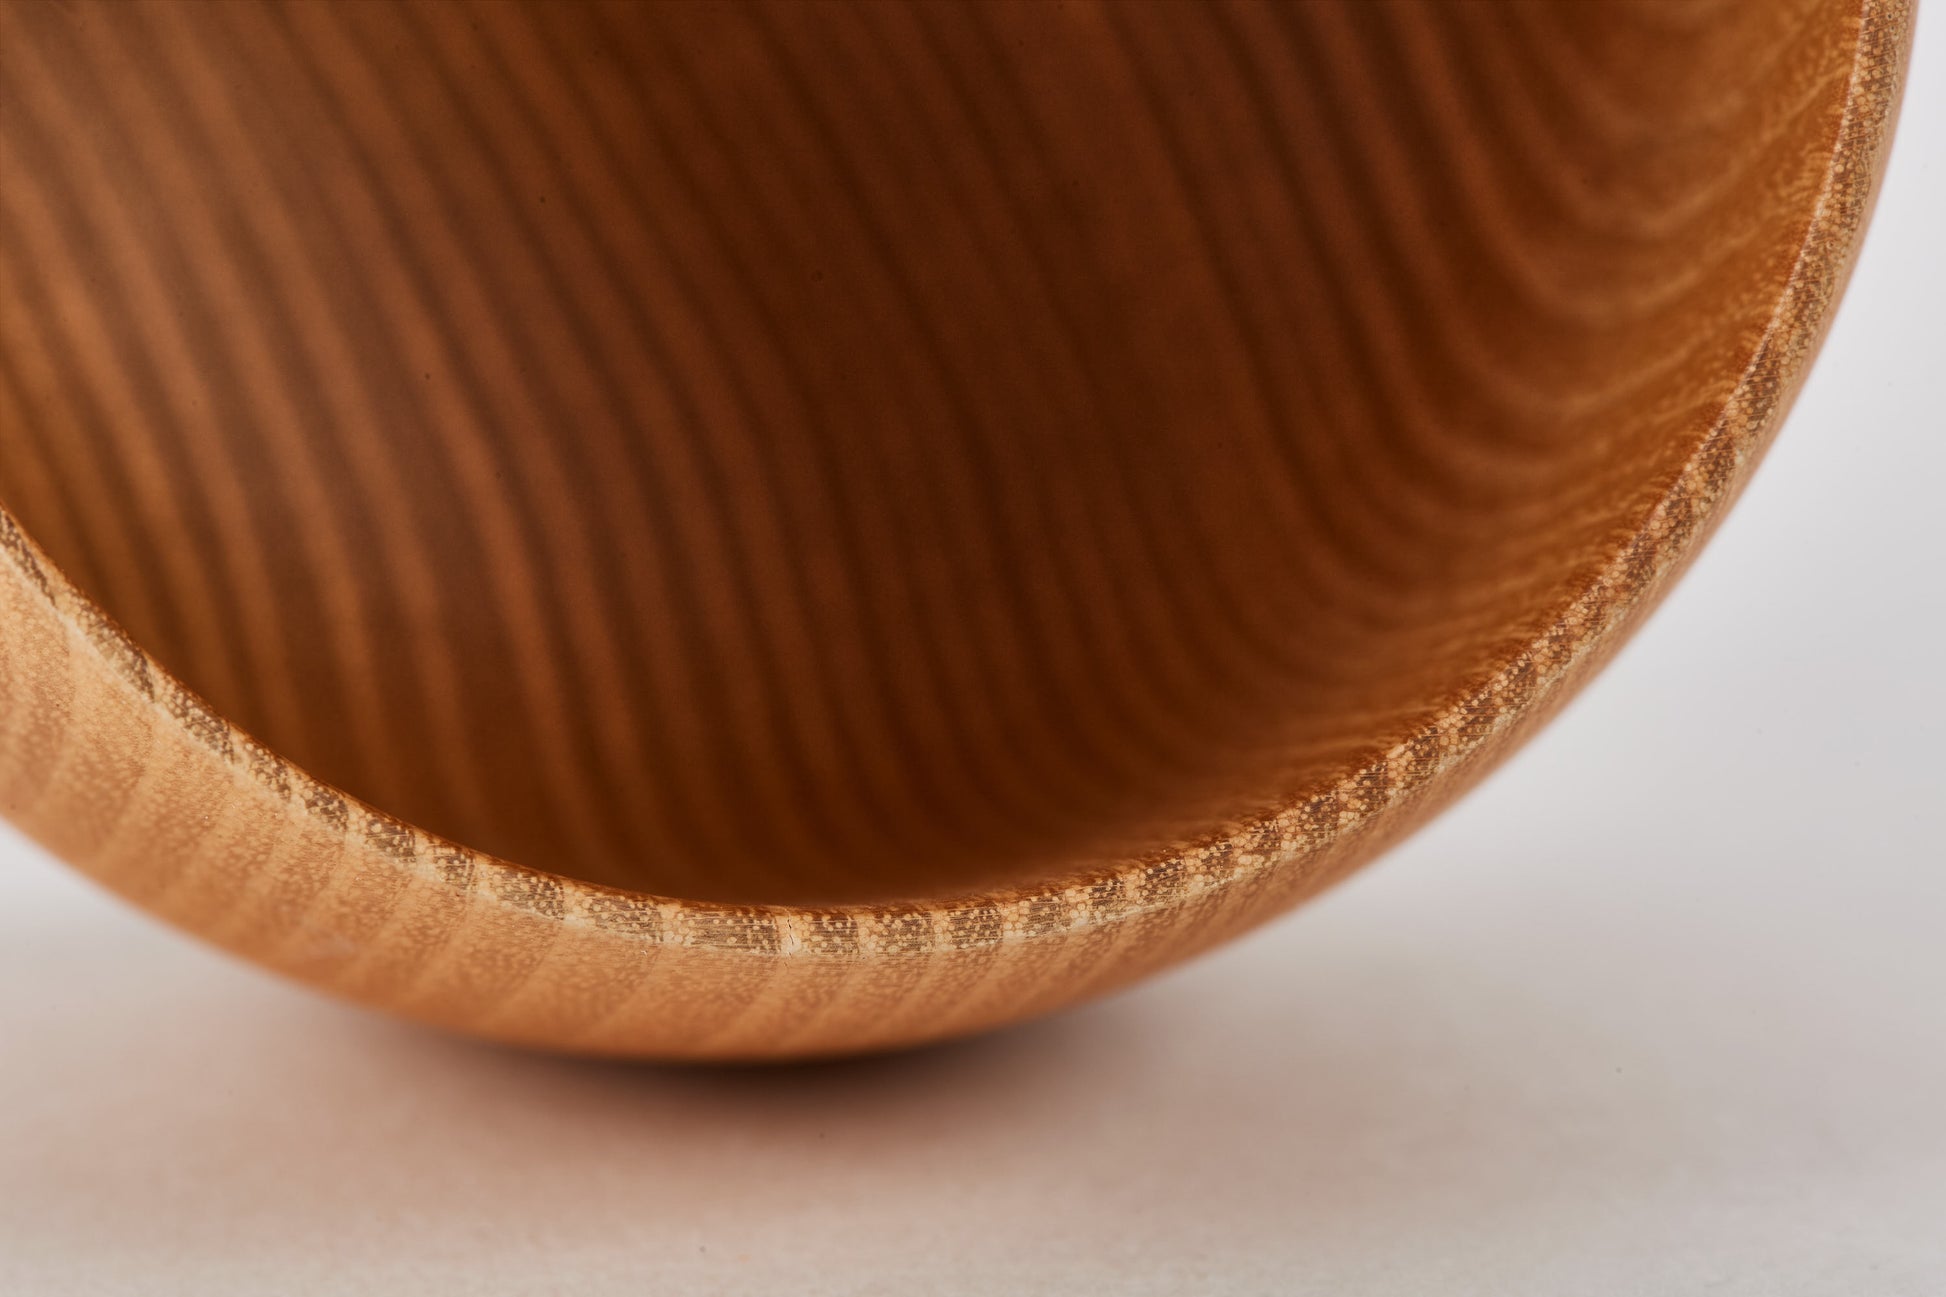 Japanese Wooden Cup- details